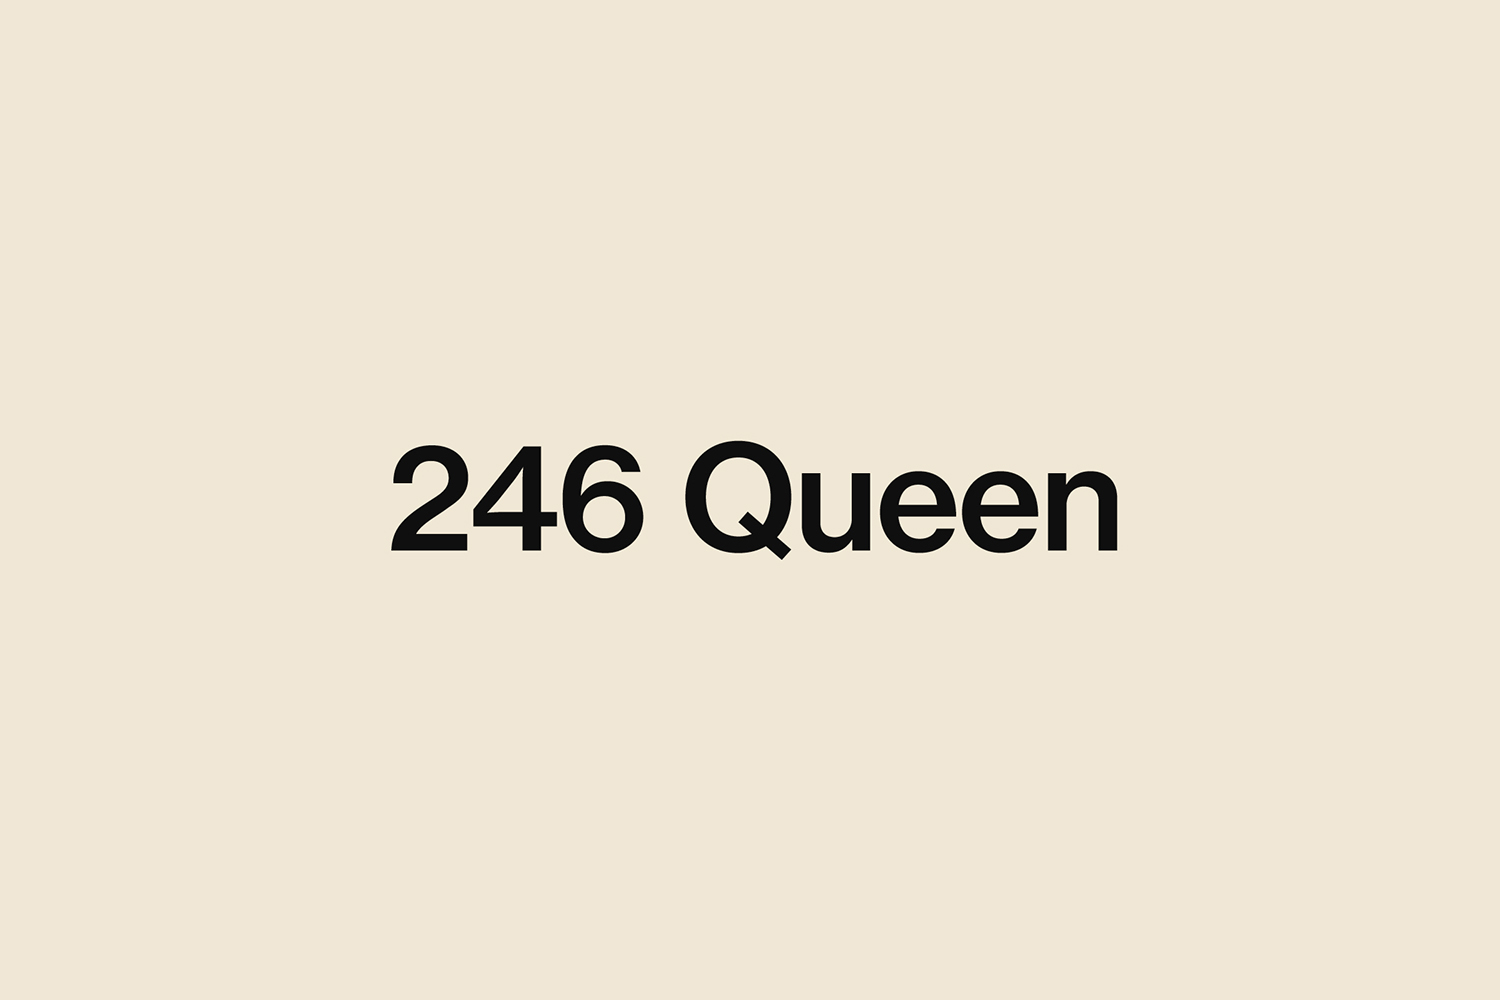 Graphic identity by Studio South for 246 Queen, a retail, hospitality and business development within a mid-century modernist building in Auckland